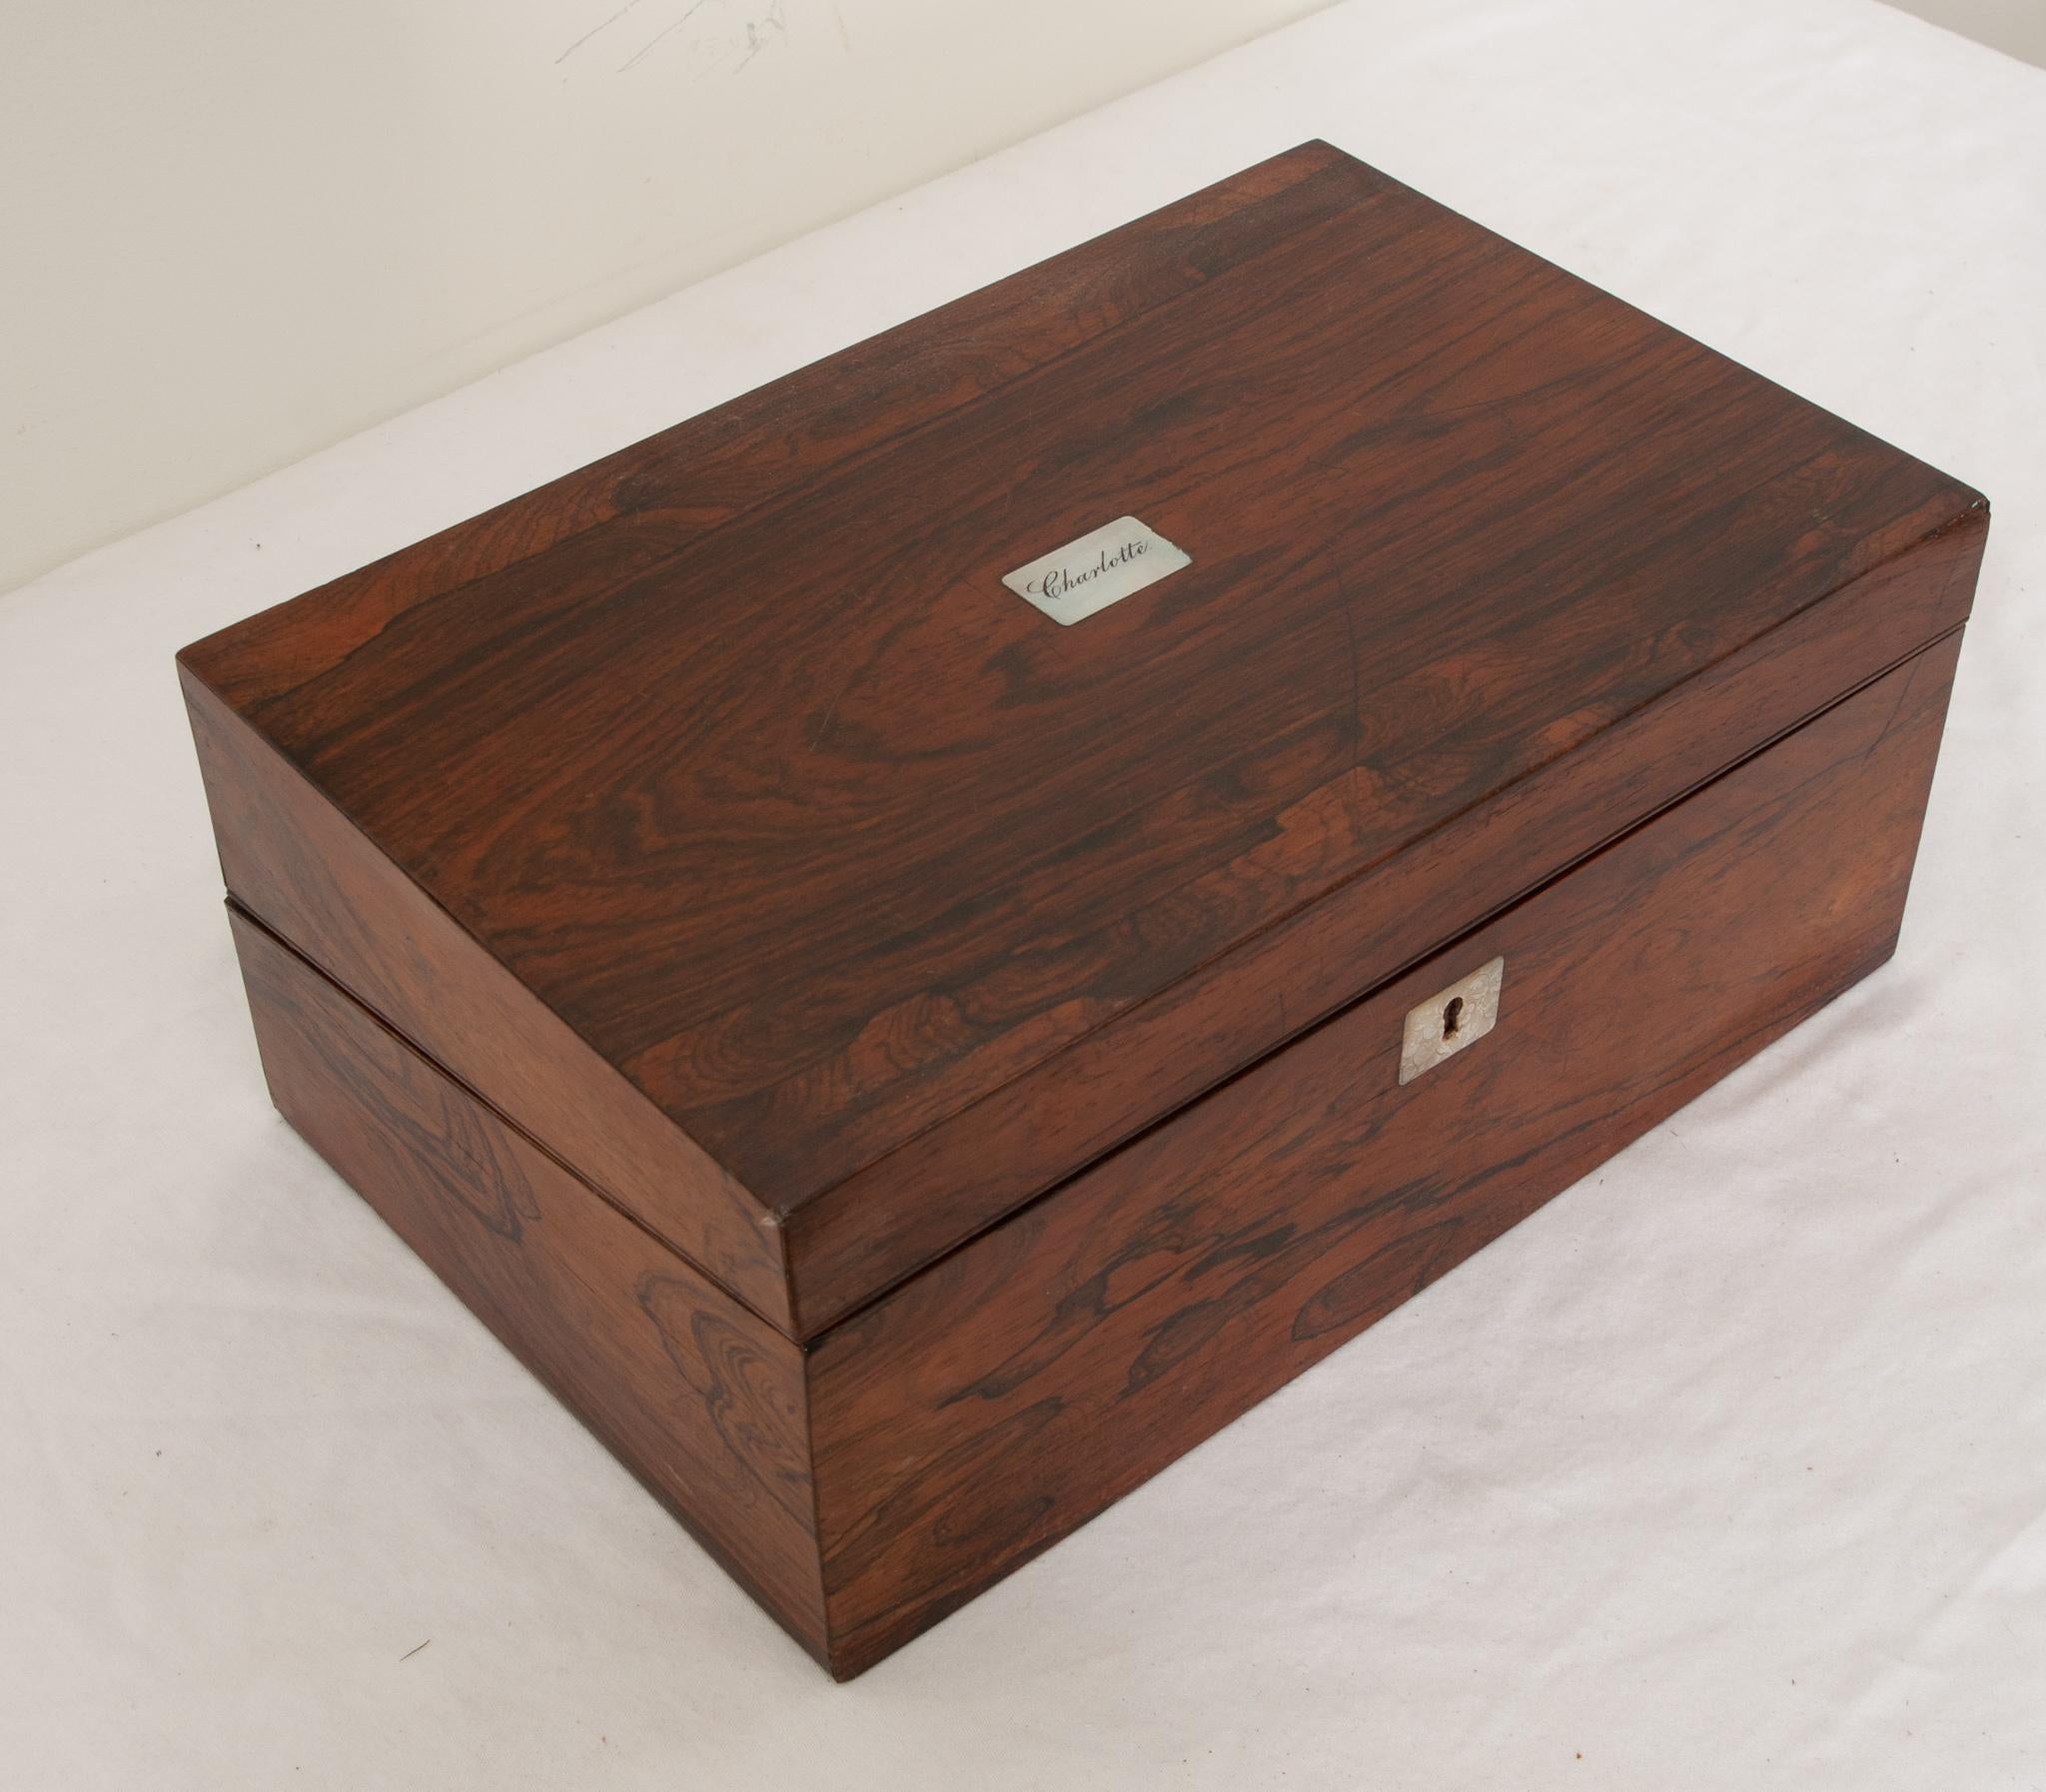 A French traveling writing box made of rosewood during the 1800’s. The top of the box is inlaid with a mother-of-pearl monogrammed “Charlotte” label. The box opens up to reveal its original sloped purple velvet writing surface. Within the box there